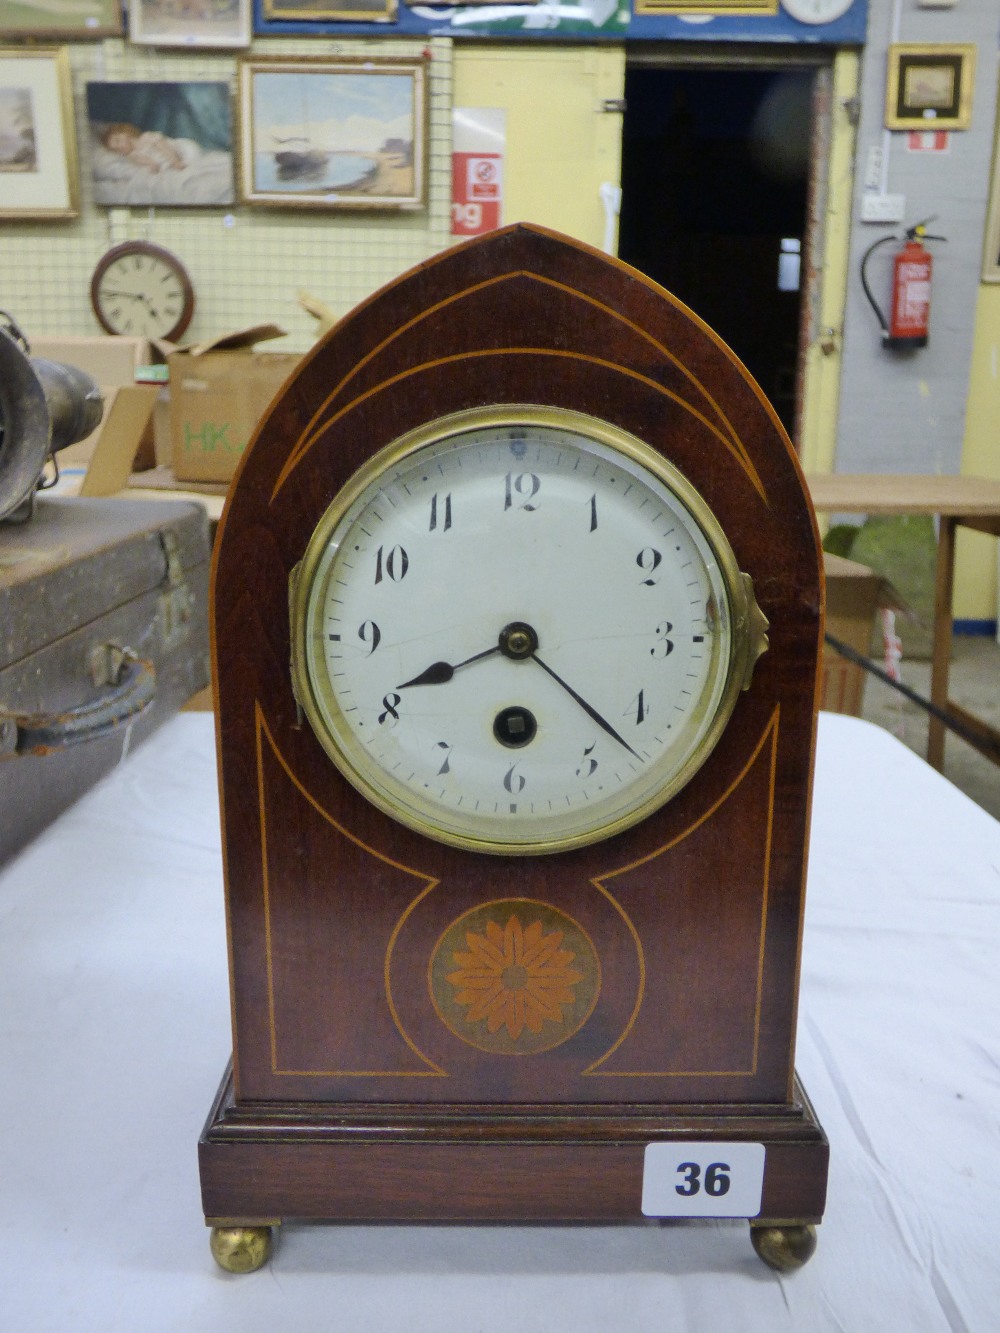 LATE 19TH CENTURY MAHOGANY INLAID LANCET MANTEL CLOCK WITH ENAMEL DIAL ,FRENCH MOVEMENT BY J.